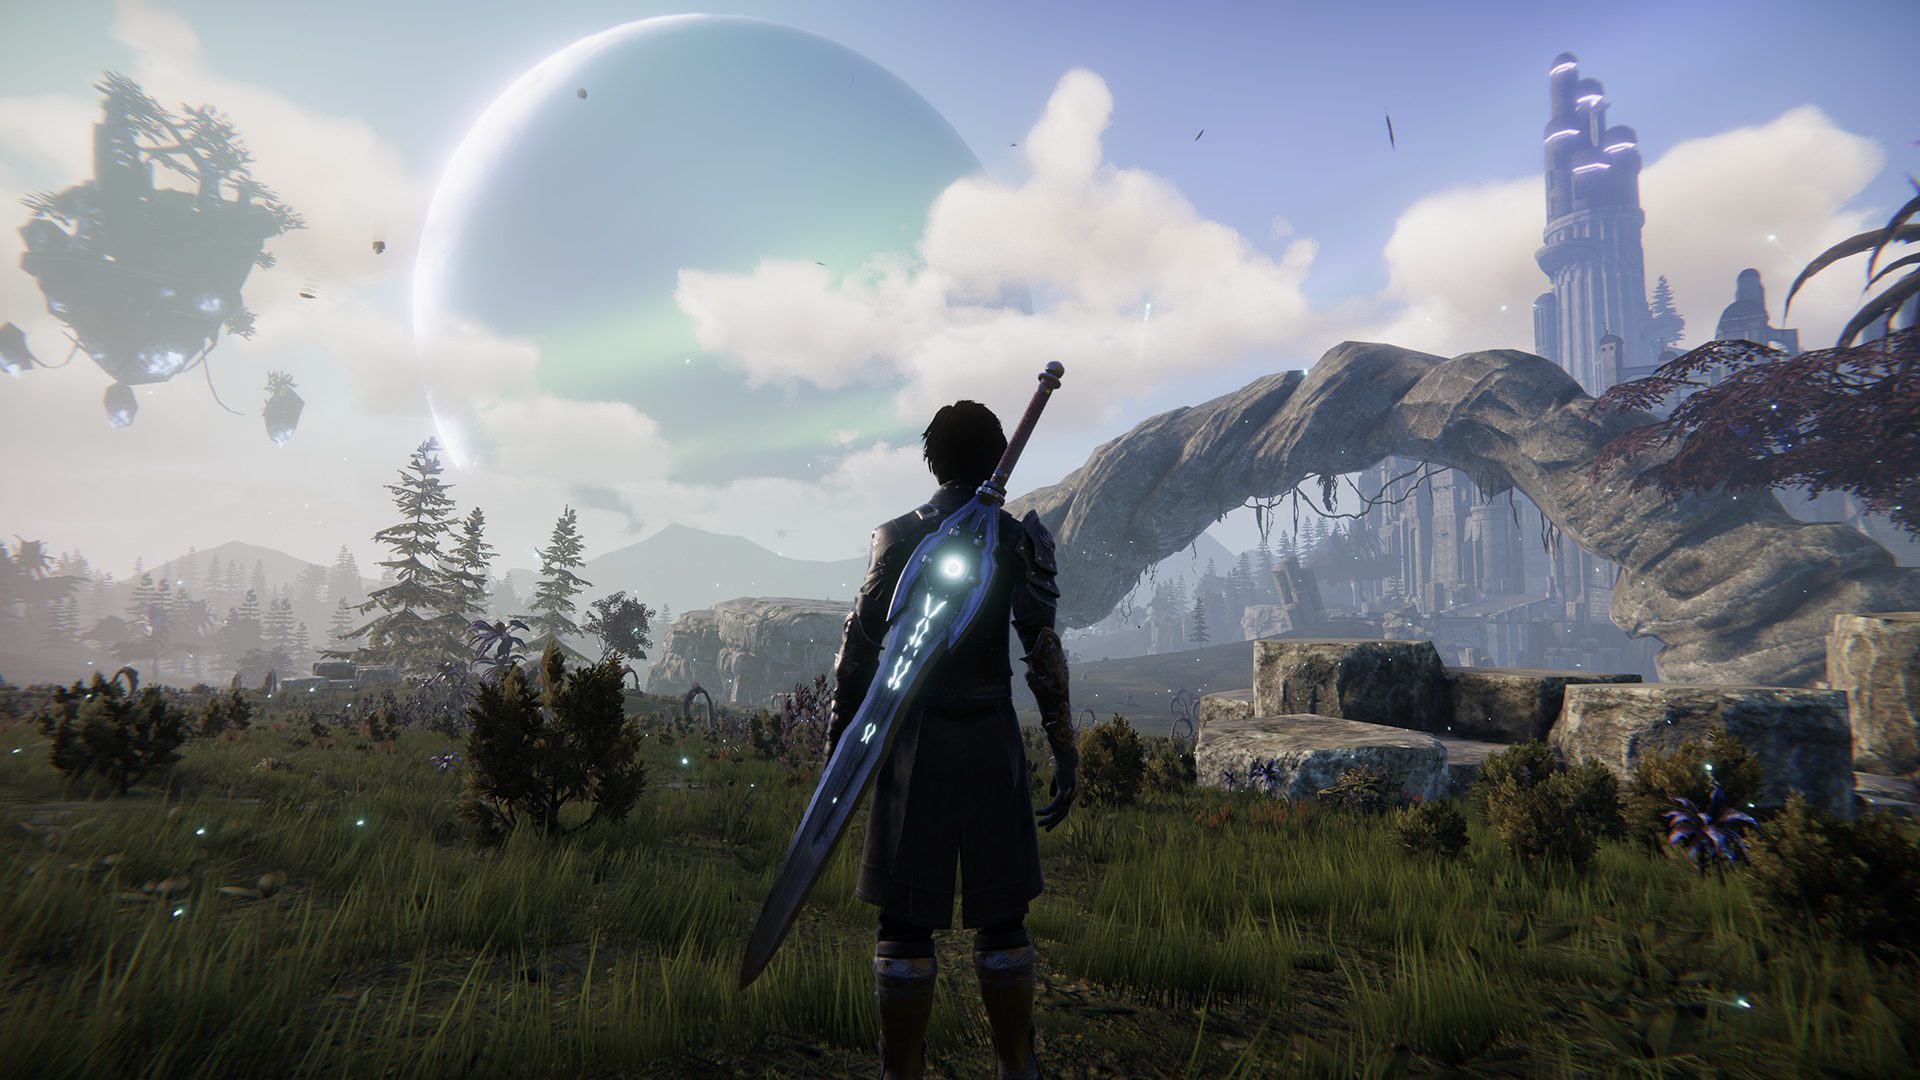 Edge of Eternity Enters Early Access on Steam this November